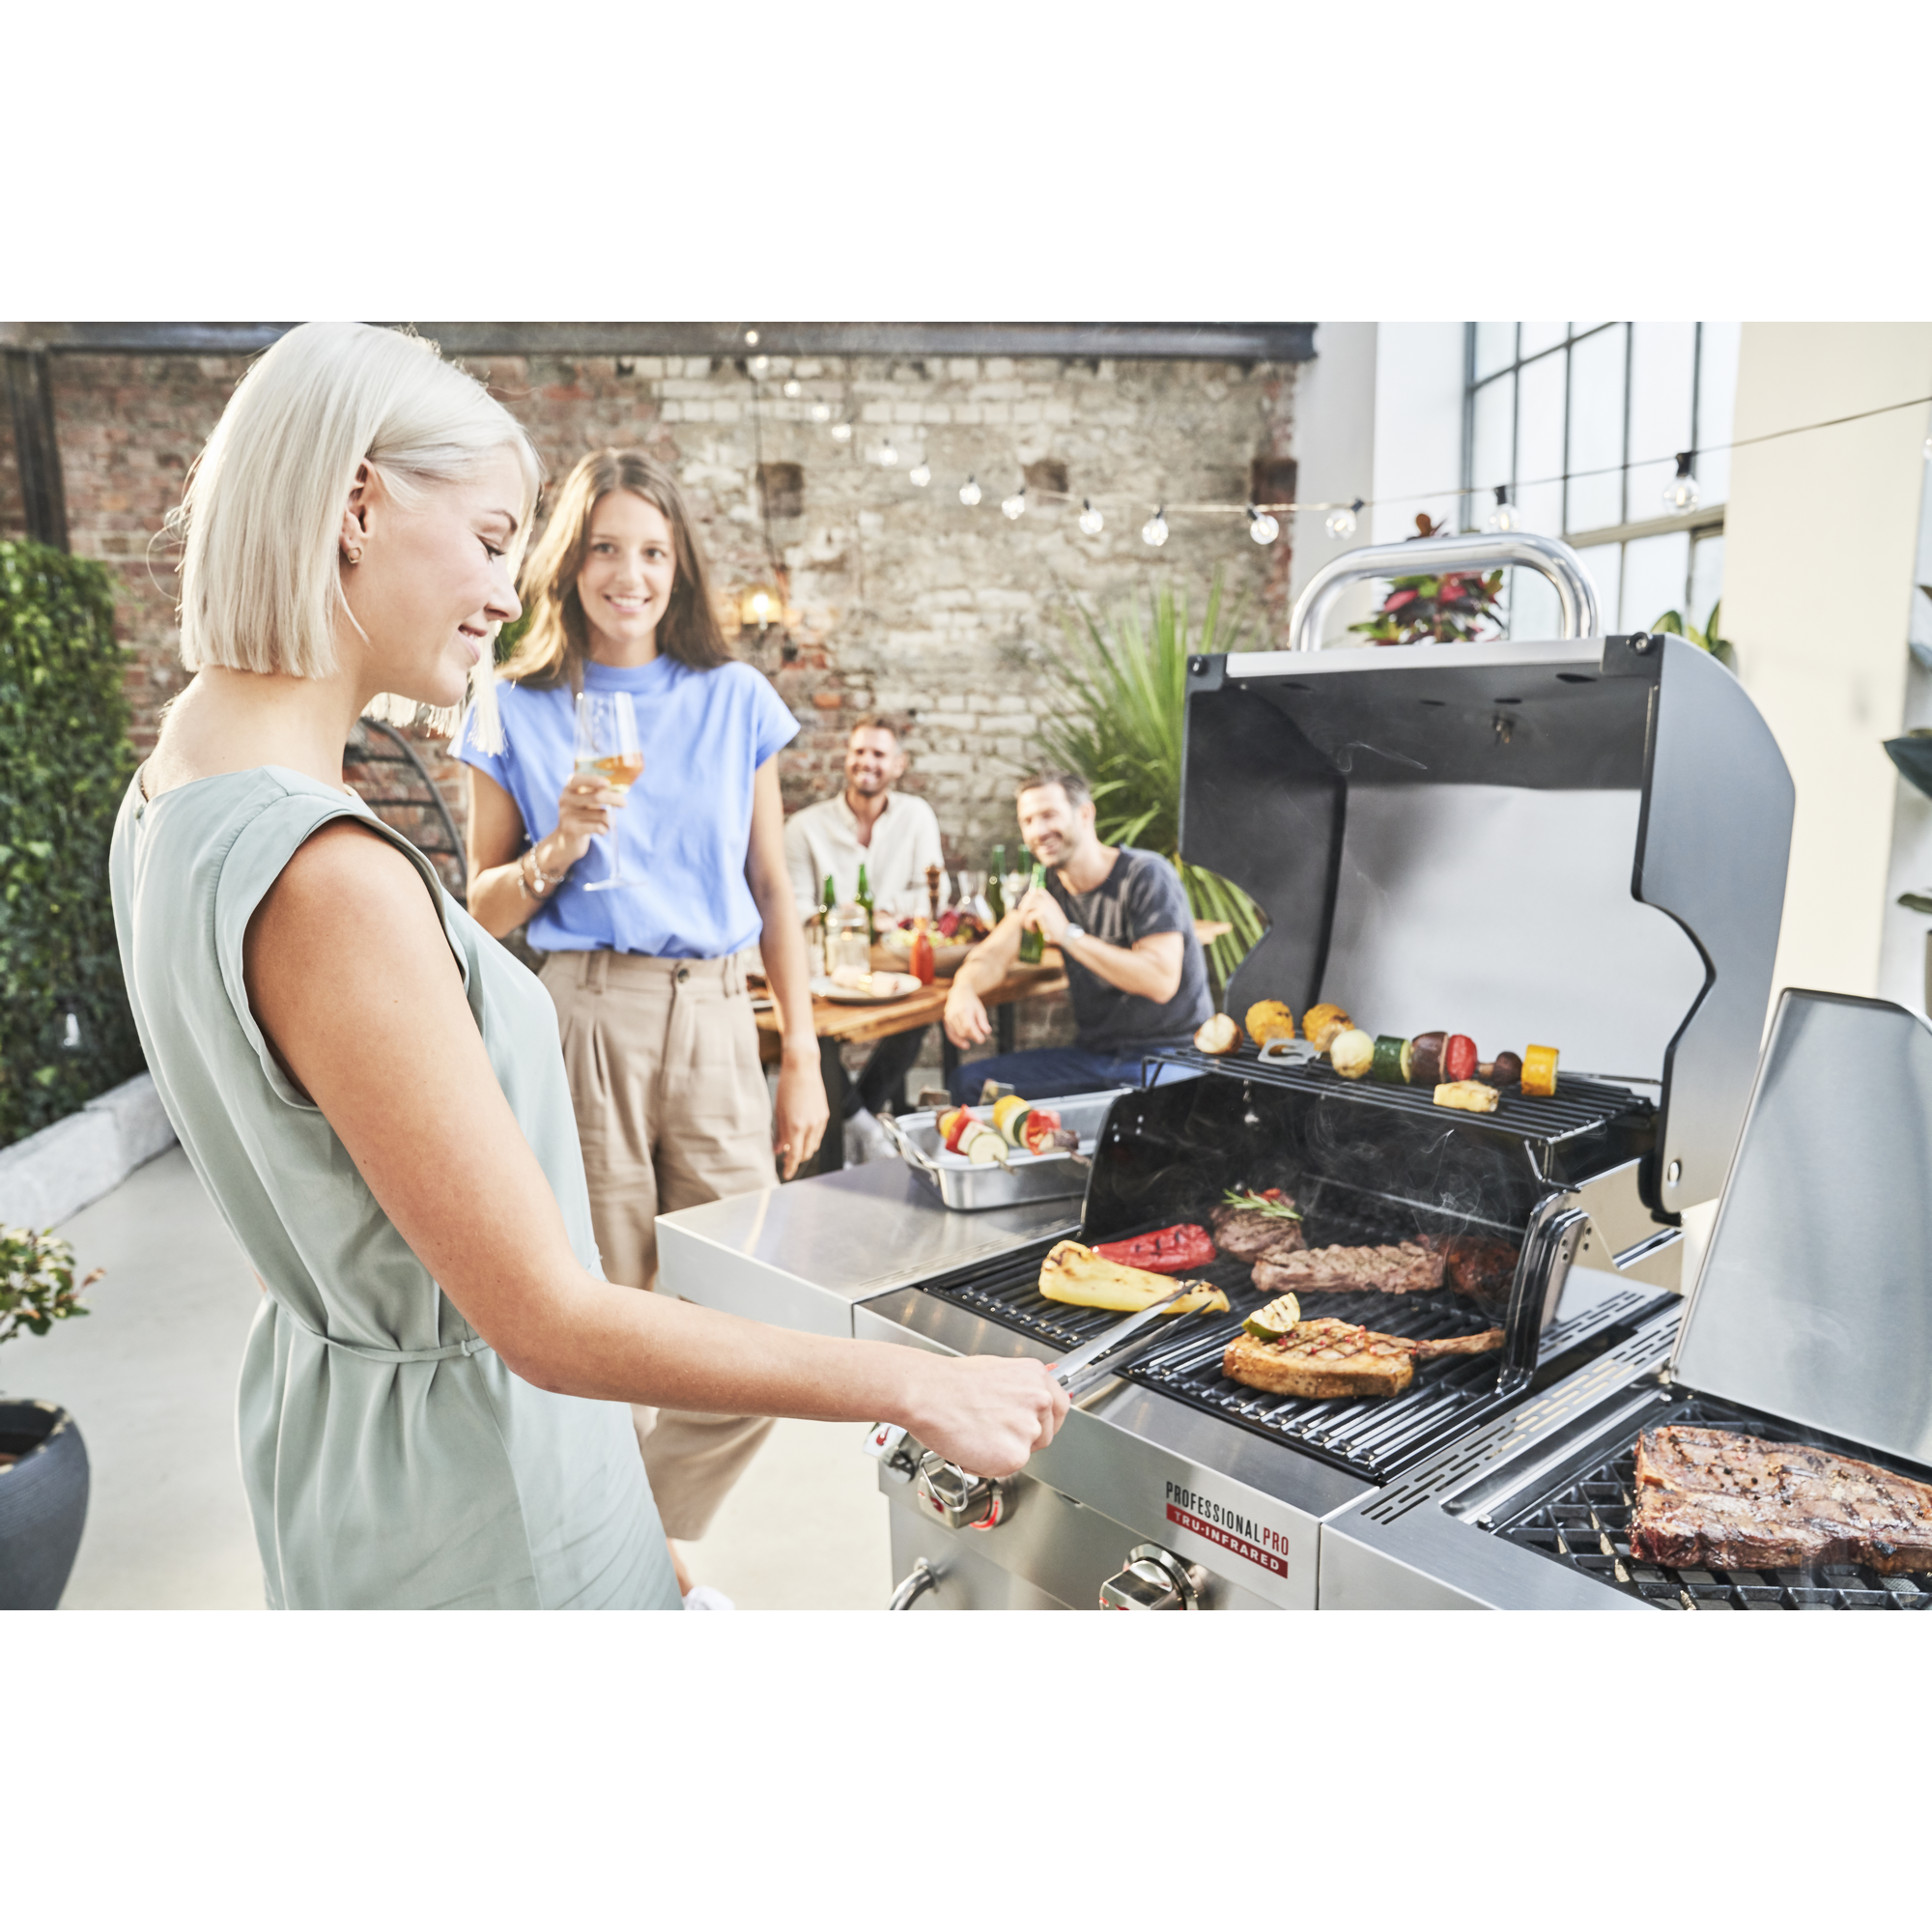 Gasgrill 'Professional Pro S2' mit 2 Brennern + product picture